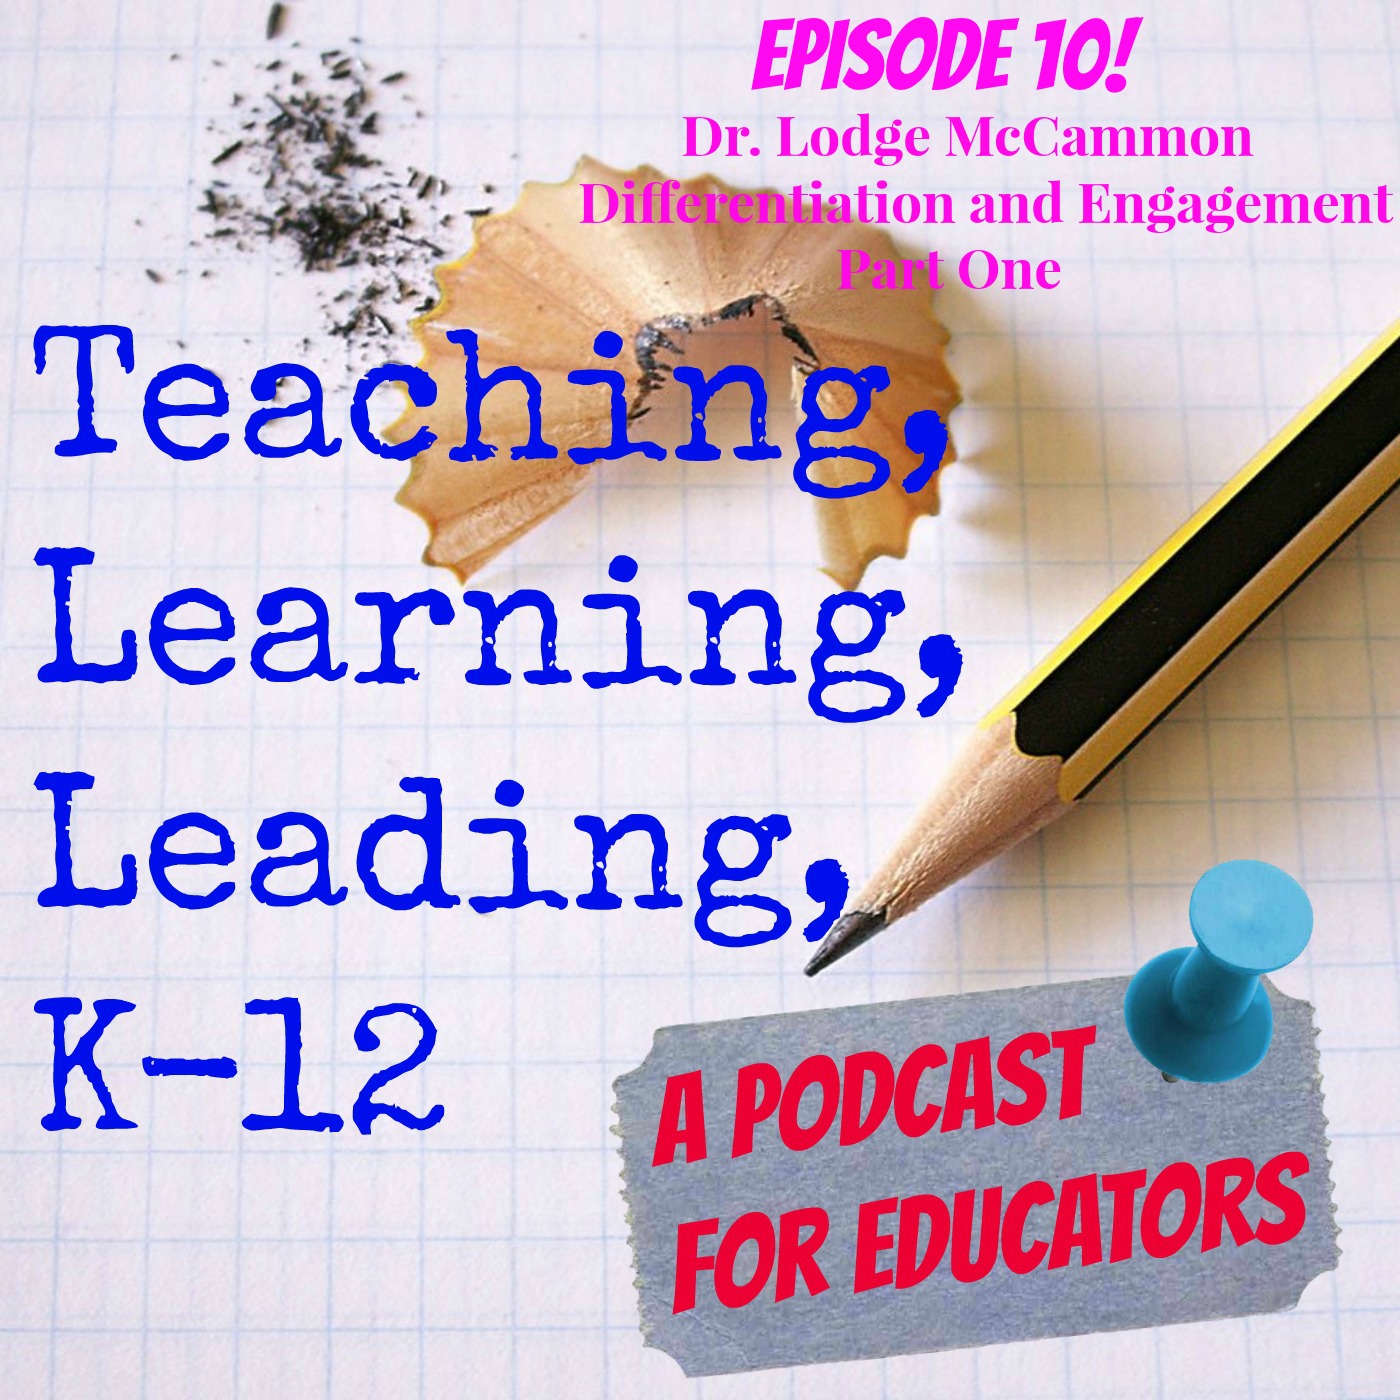 Episode 10! Dr. Lodge McCammon/Differentiation and Engagement part 1